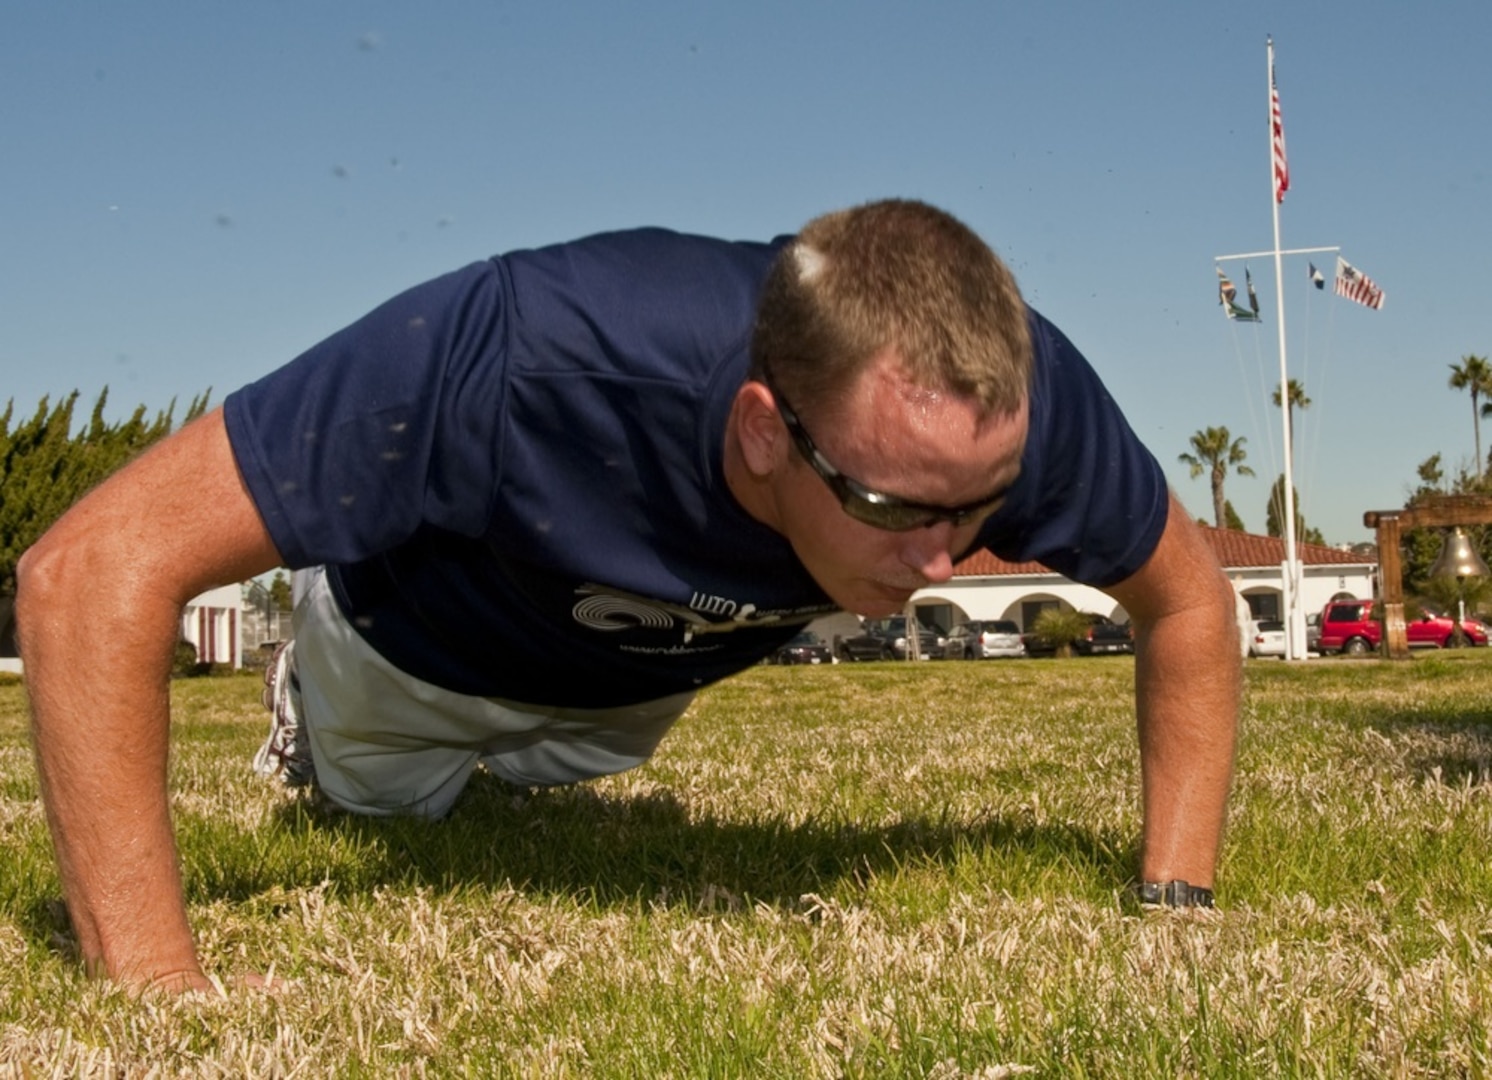 SAN DIEGO - U.S. Coast Guard Petty Officer 2nd Class Matthew Fritchey, a marine science technician assigned to Sector San Diego, does pushups on the parade field at the sector, Monday, Feb. 7, 2010. Fritchey is building up points, which will be converted to miles in hopes of his team winning the D11 Admiral's physical fitness challenge. U. S. Coast Guard photo by Petty Officer 2nd Class Jetta H. Disco.